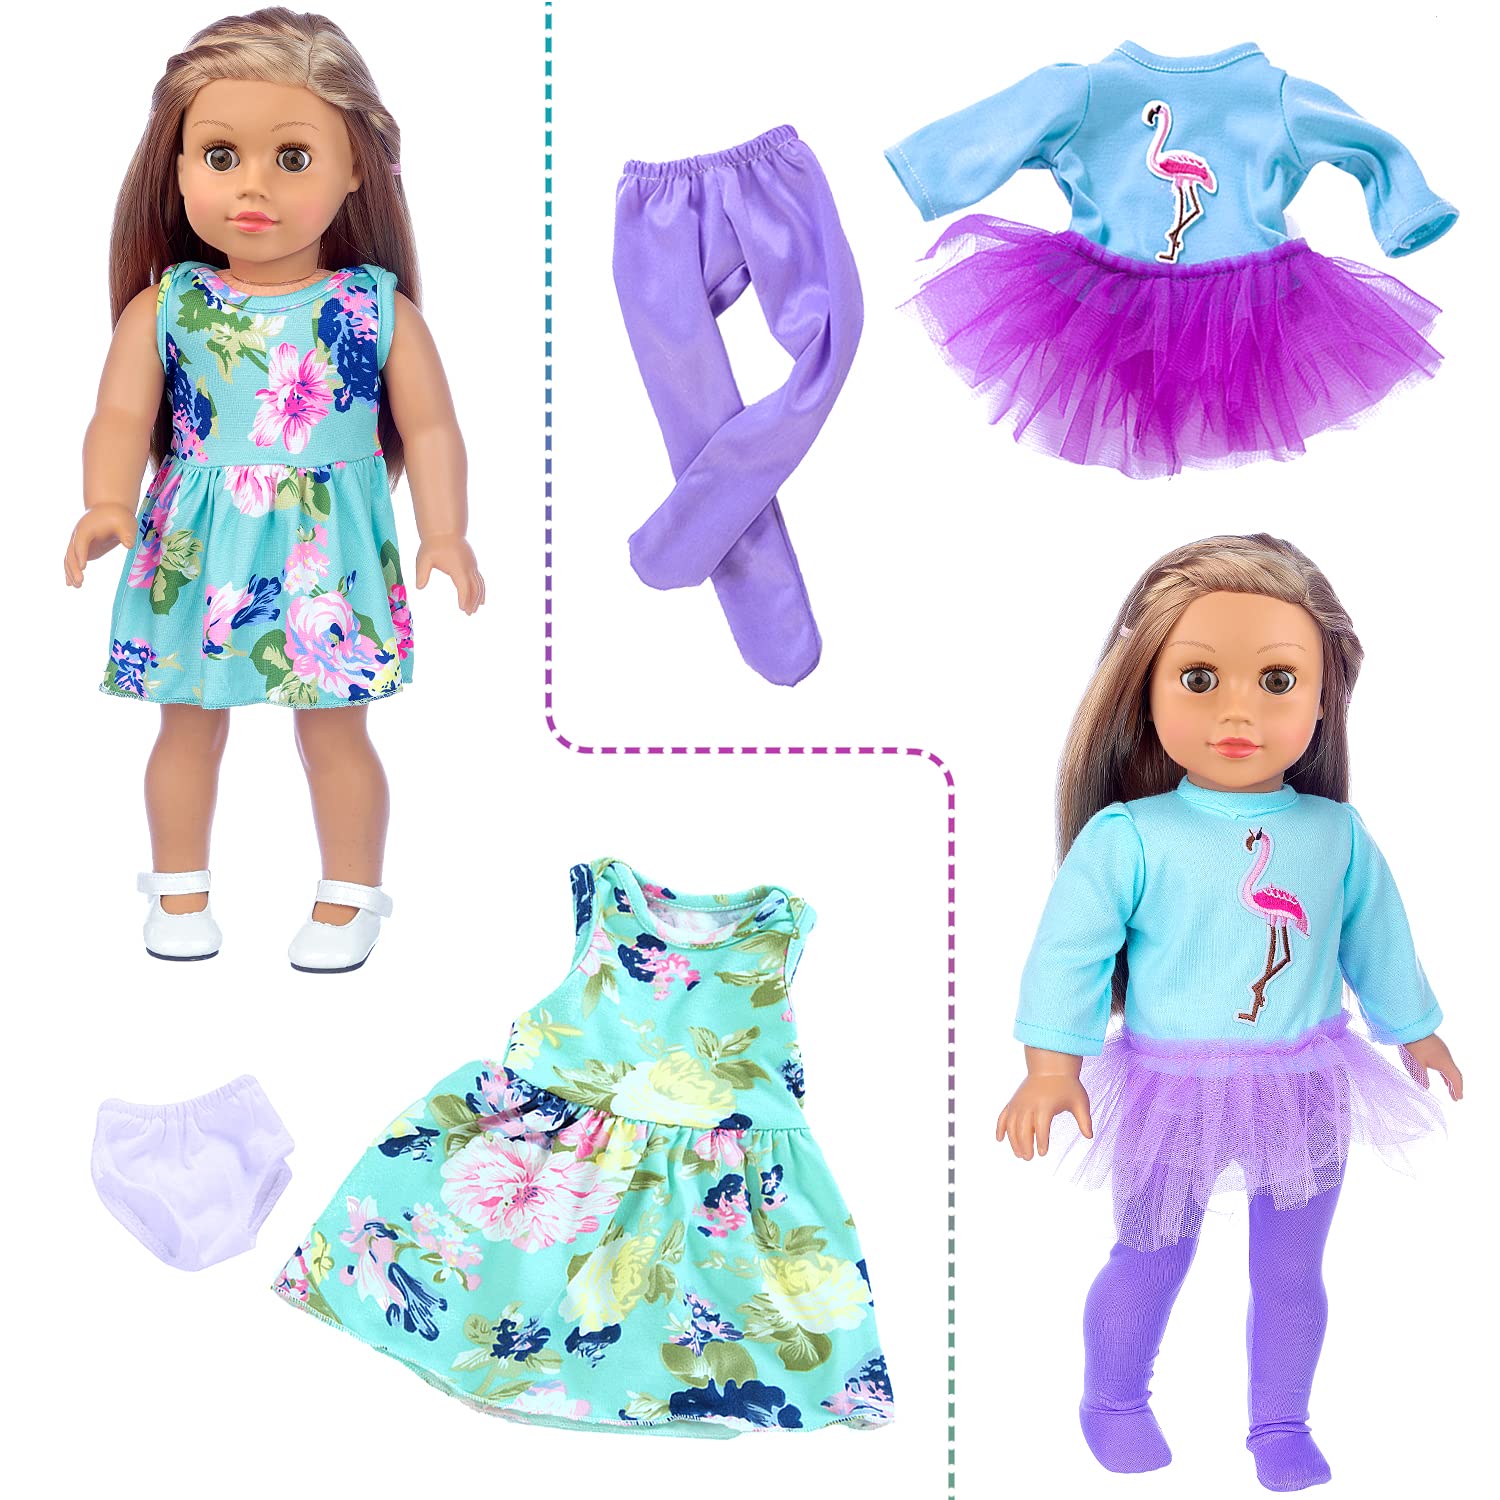 ZITA ELEMENT 24 Pcs 18 Inch Girl Doll Clothes and Accessories - Doll Clothing Outfits Dress Swimsuits Tights for 18 Inch Dolls Christmas Birthday Gift